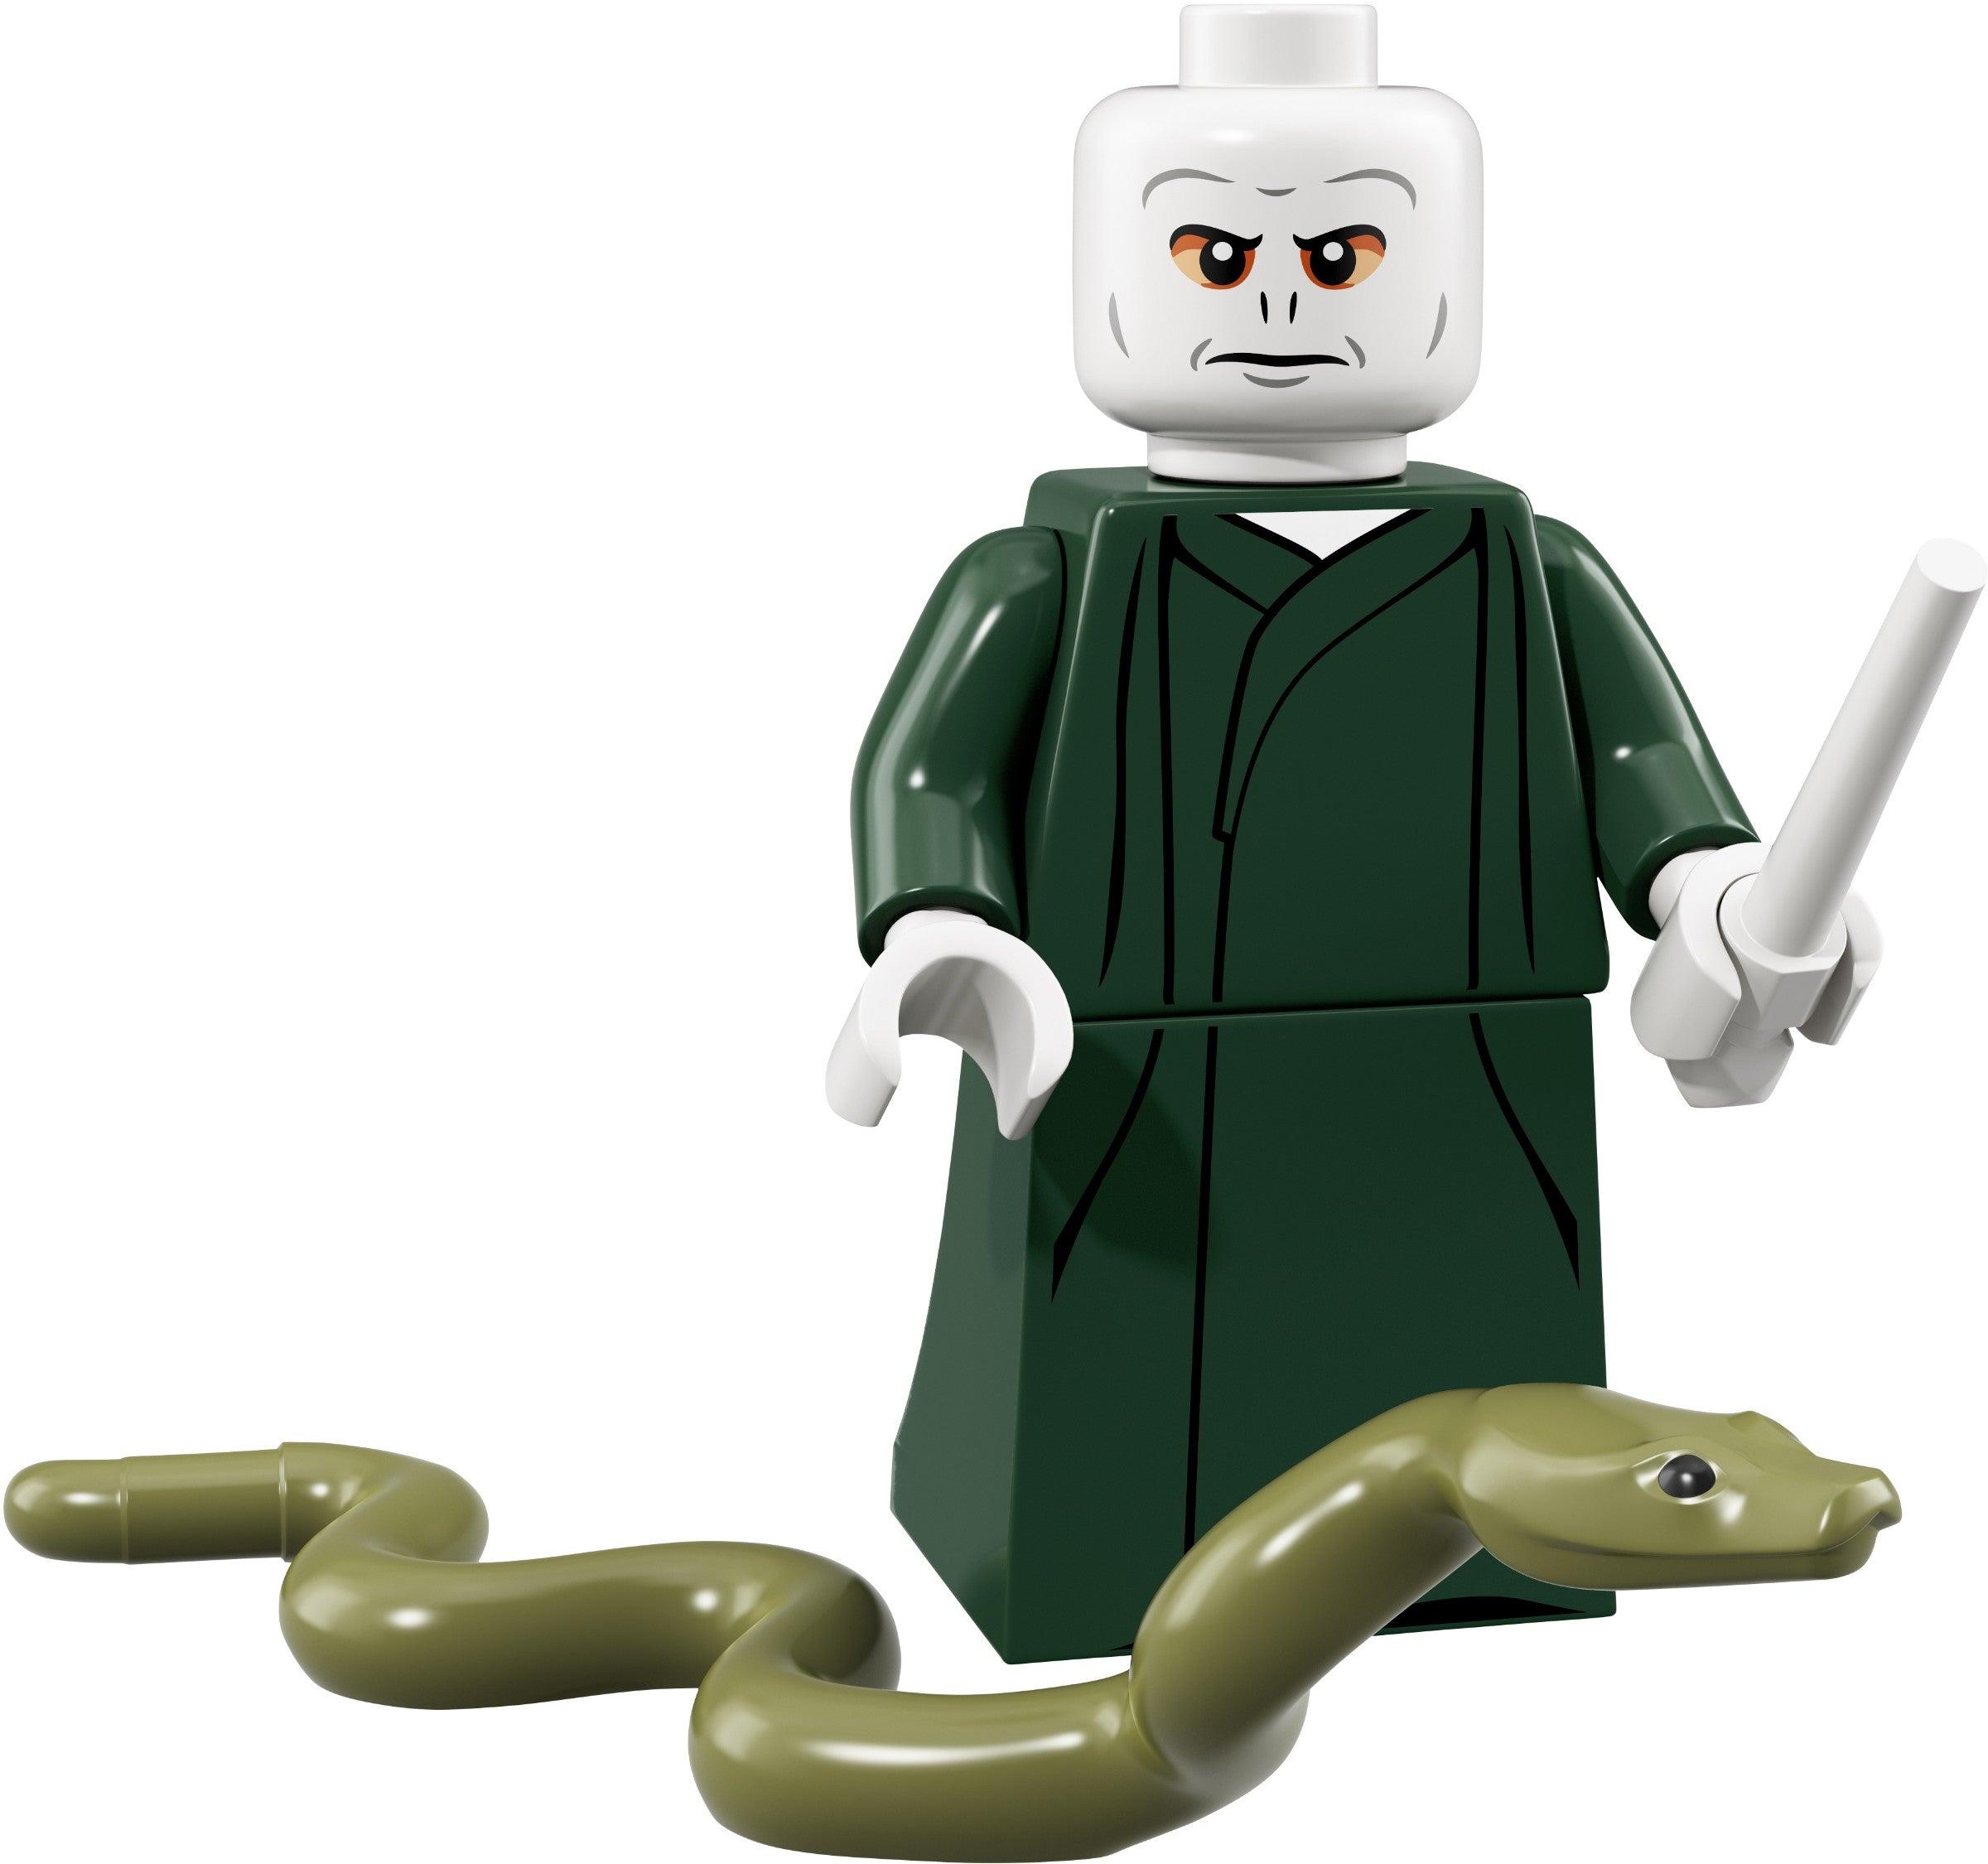 LEGO 71022-09 Minifigure Harry Potter and Fantastic Beasts Series 1 - Lord Voldemort